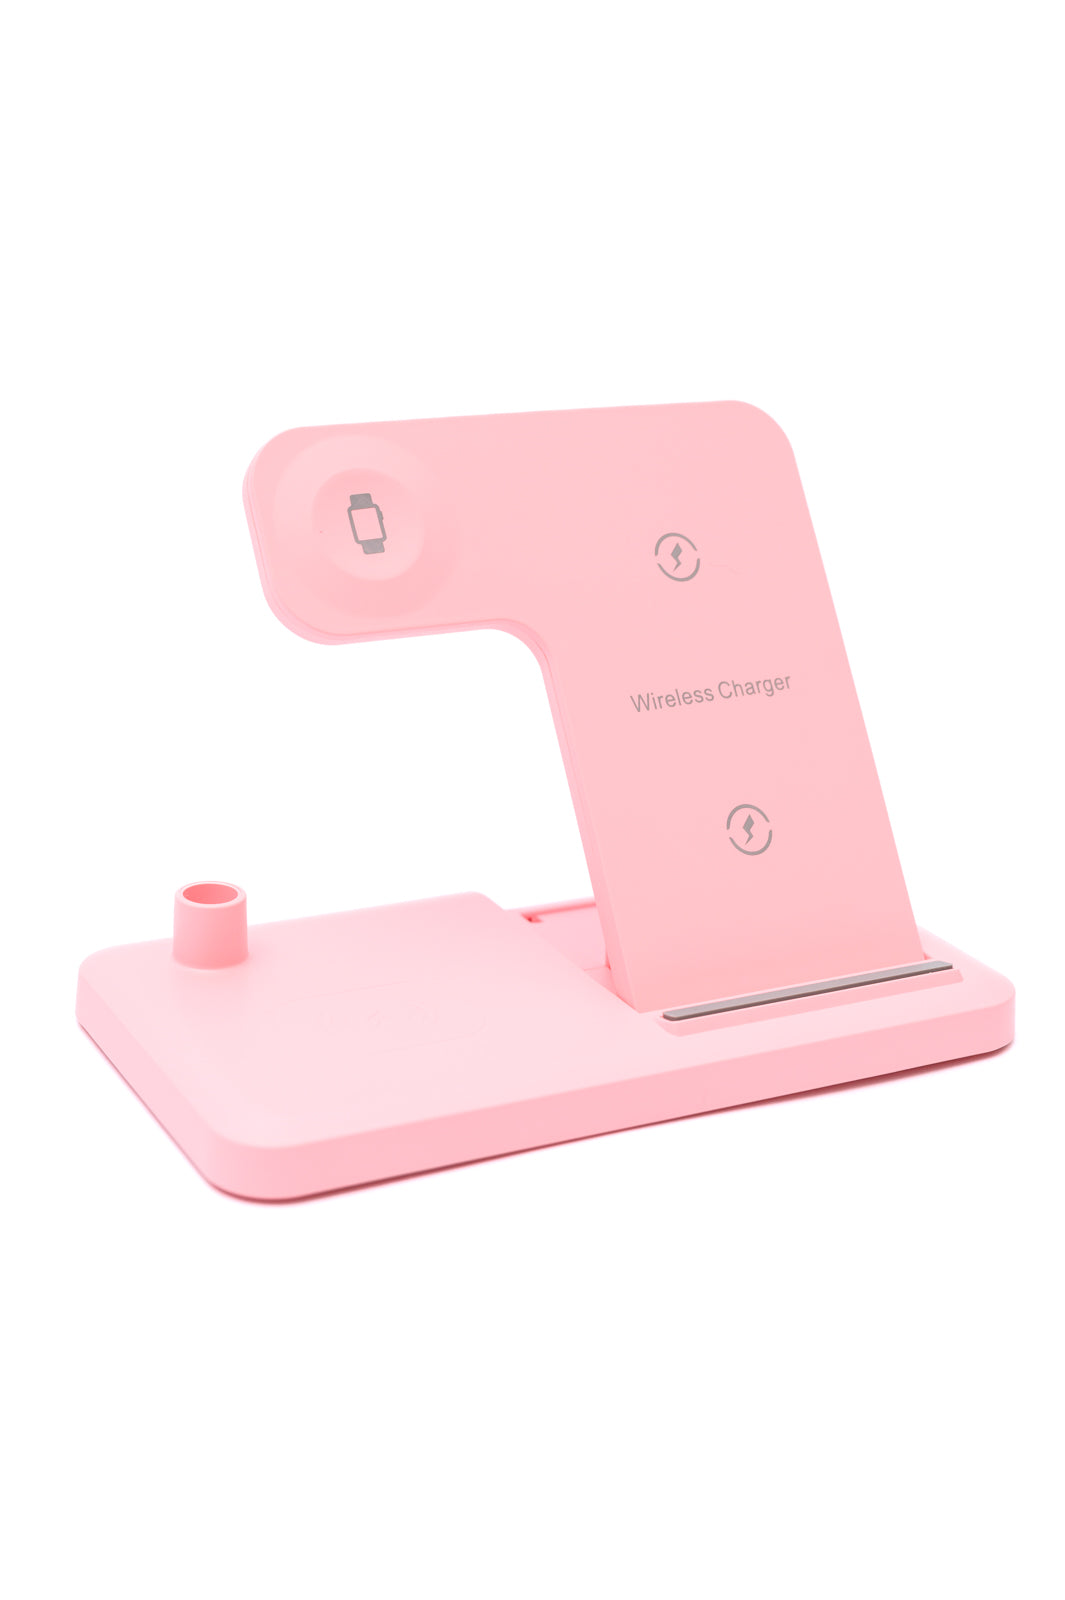 Creative Space Wireless Charger in Pink-Womens-OS-jsbecigarette Shop for Women & Kids